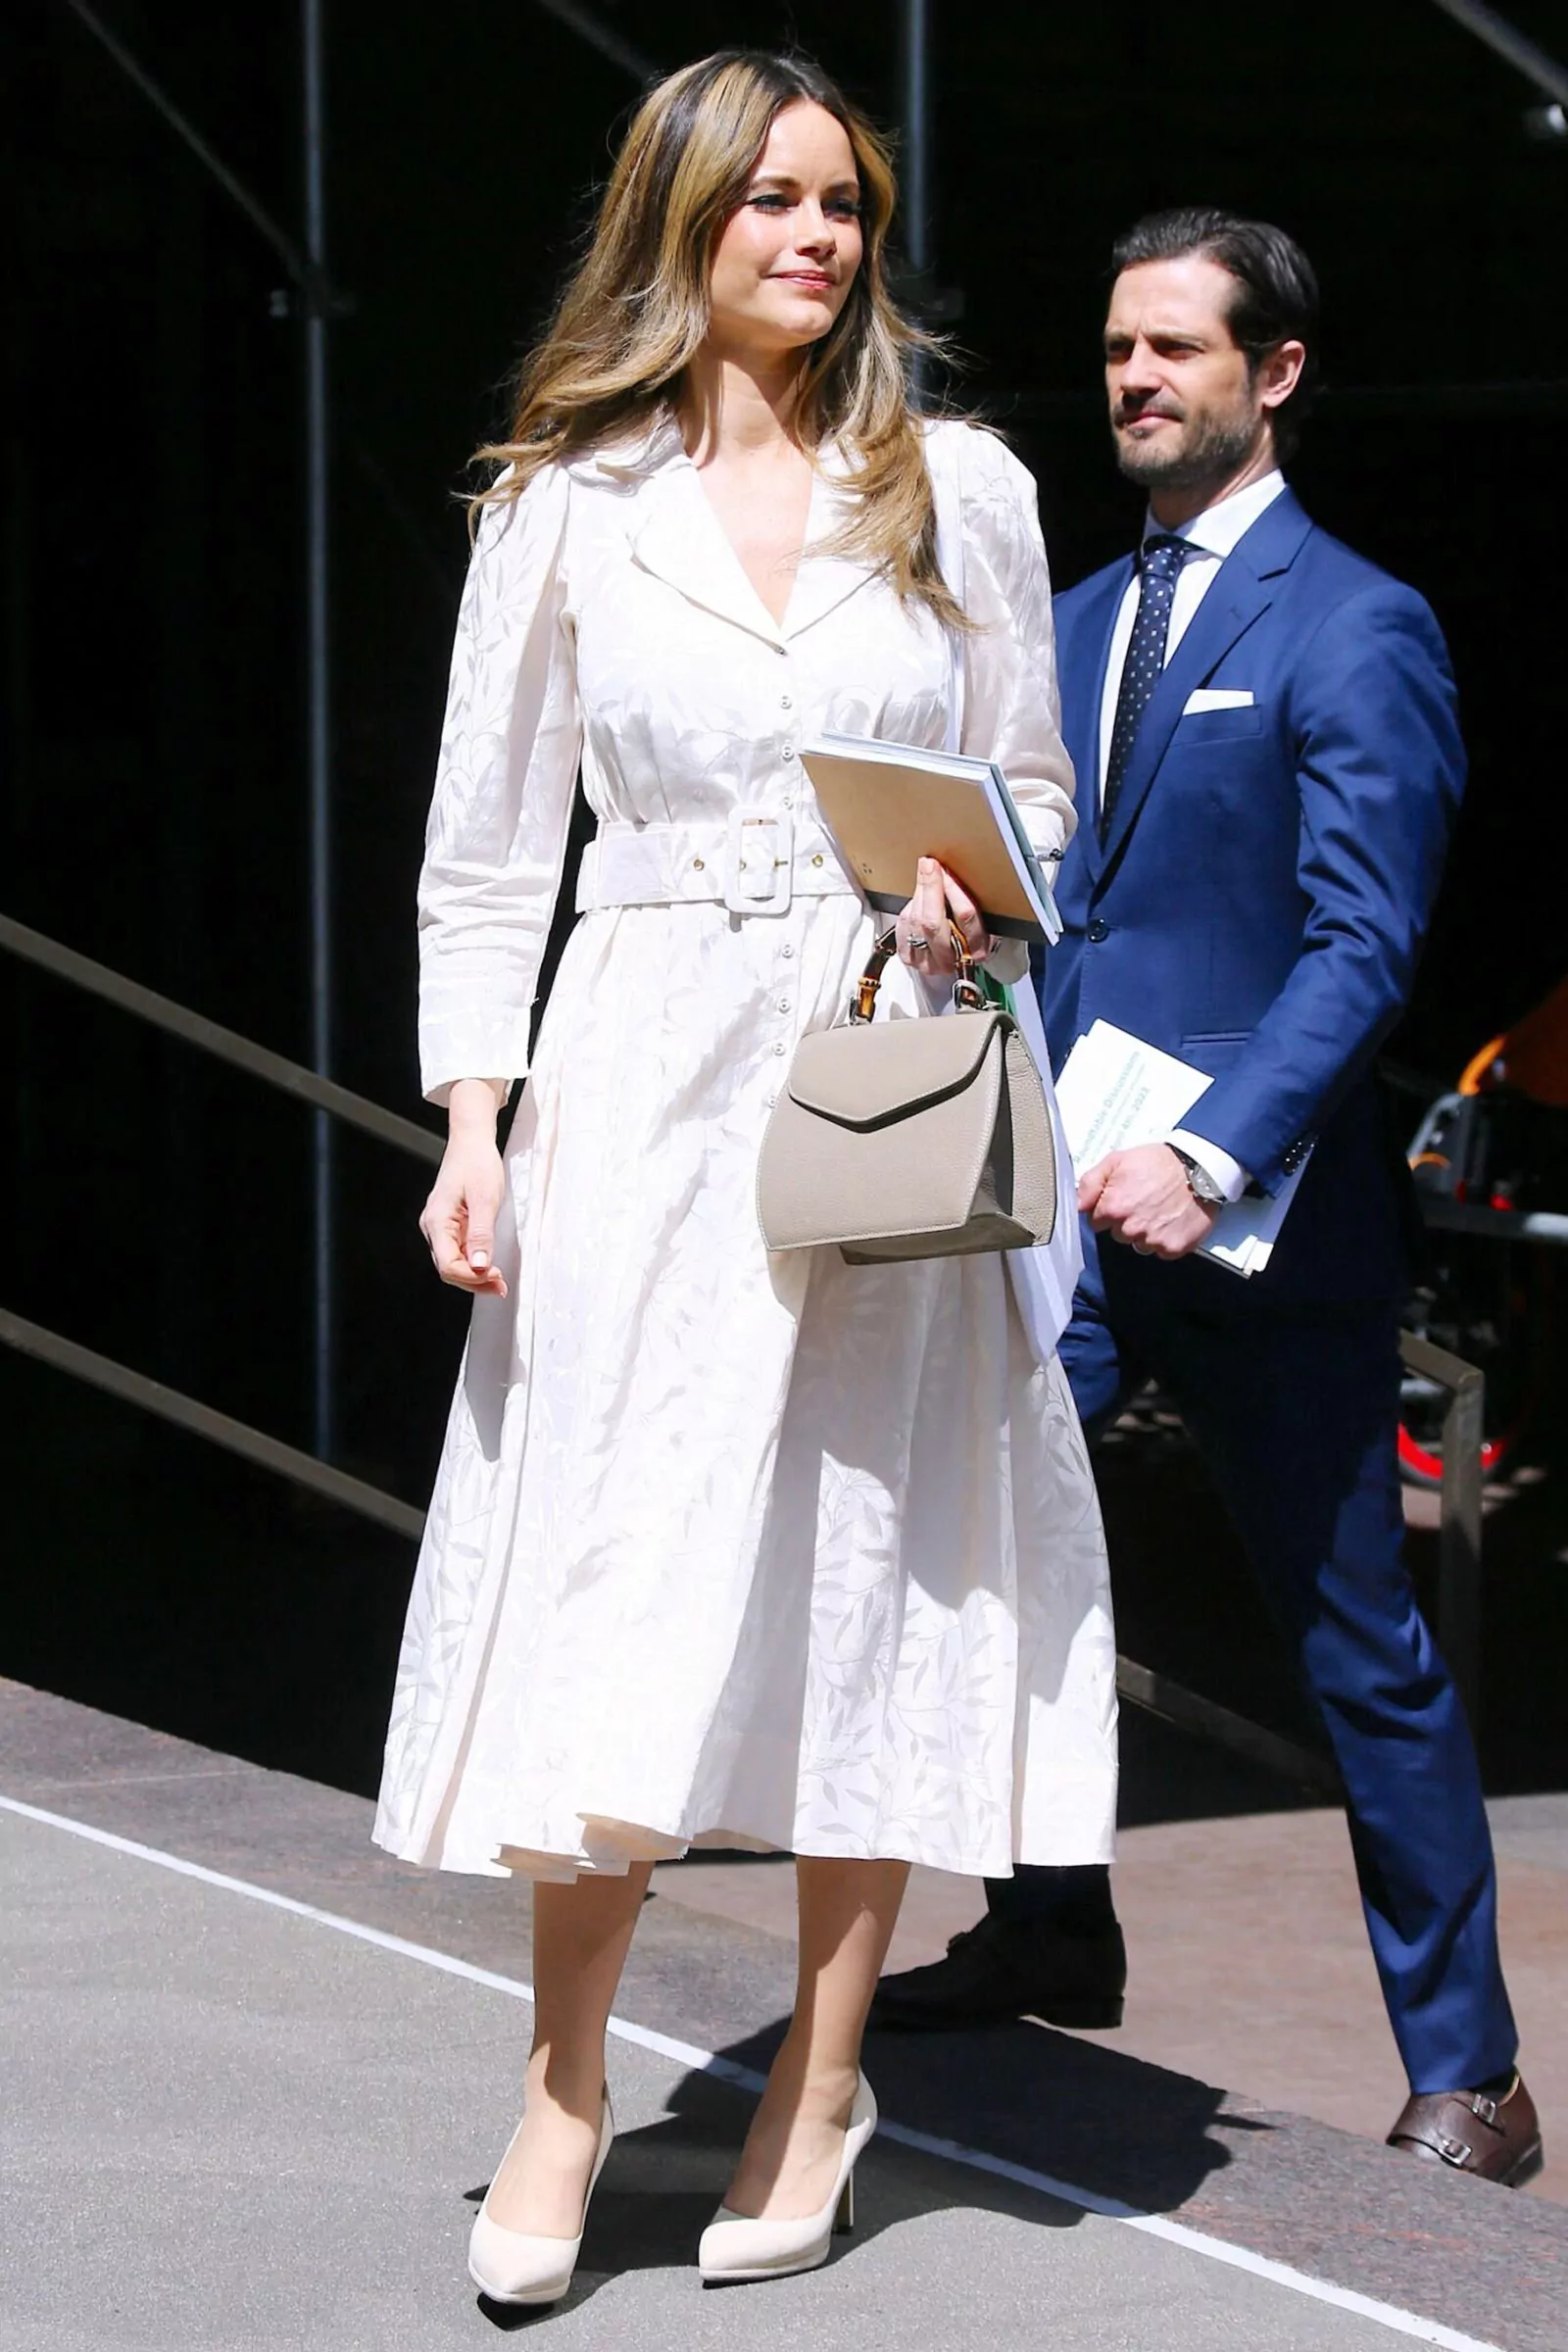 Princess Sofia and Prince Carl Philip attend an event on children's rights to equal education in New York, April 4, 2023.